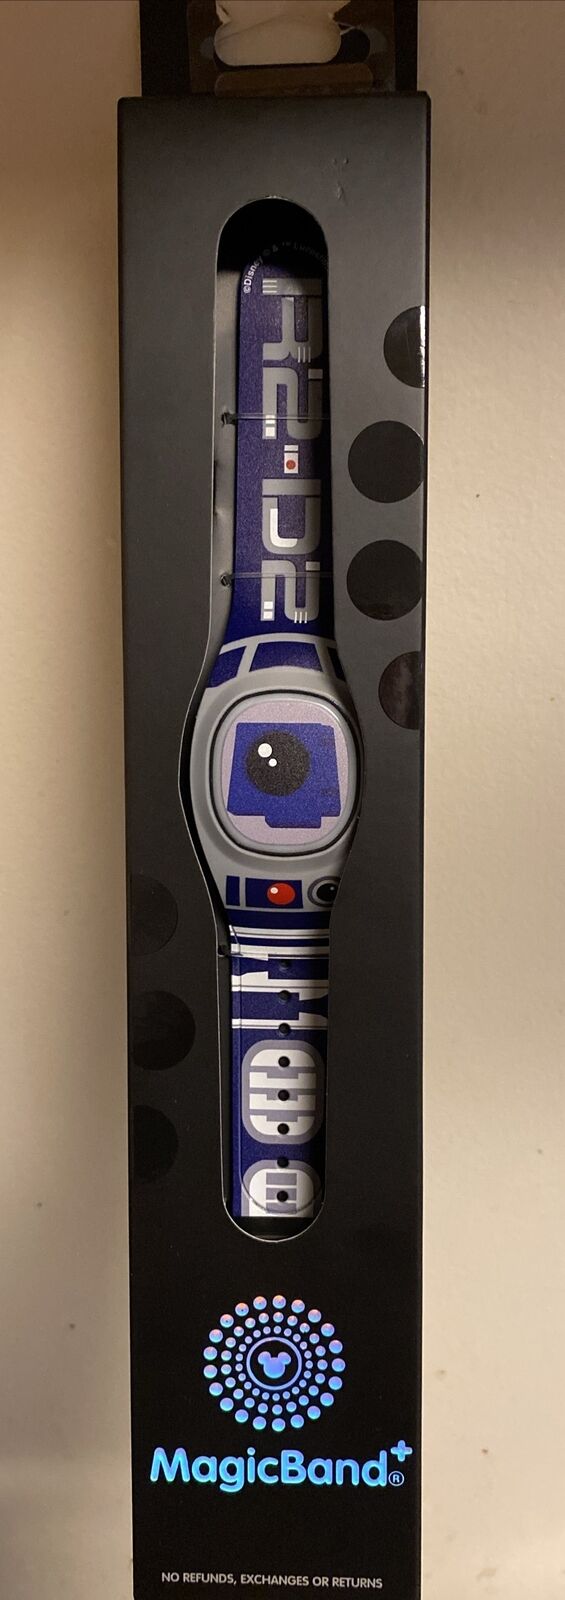 Disney Star Wars R2-D2 Droid Magic Band Plus + Unlinked New In Box W/ Cable